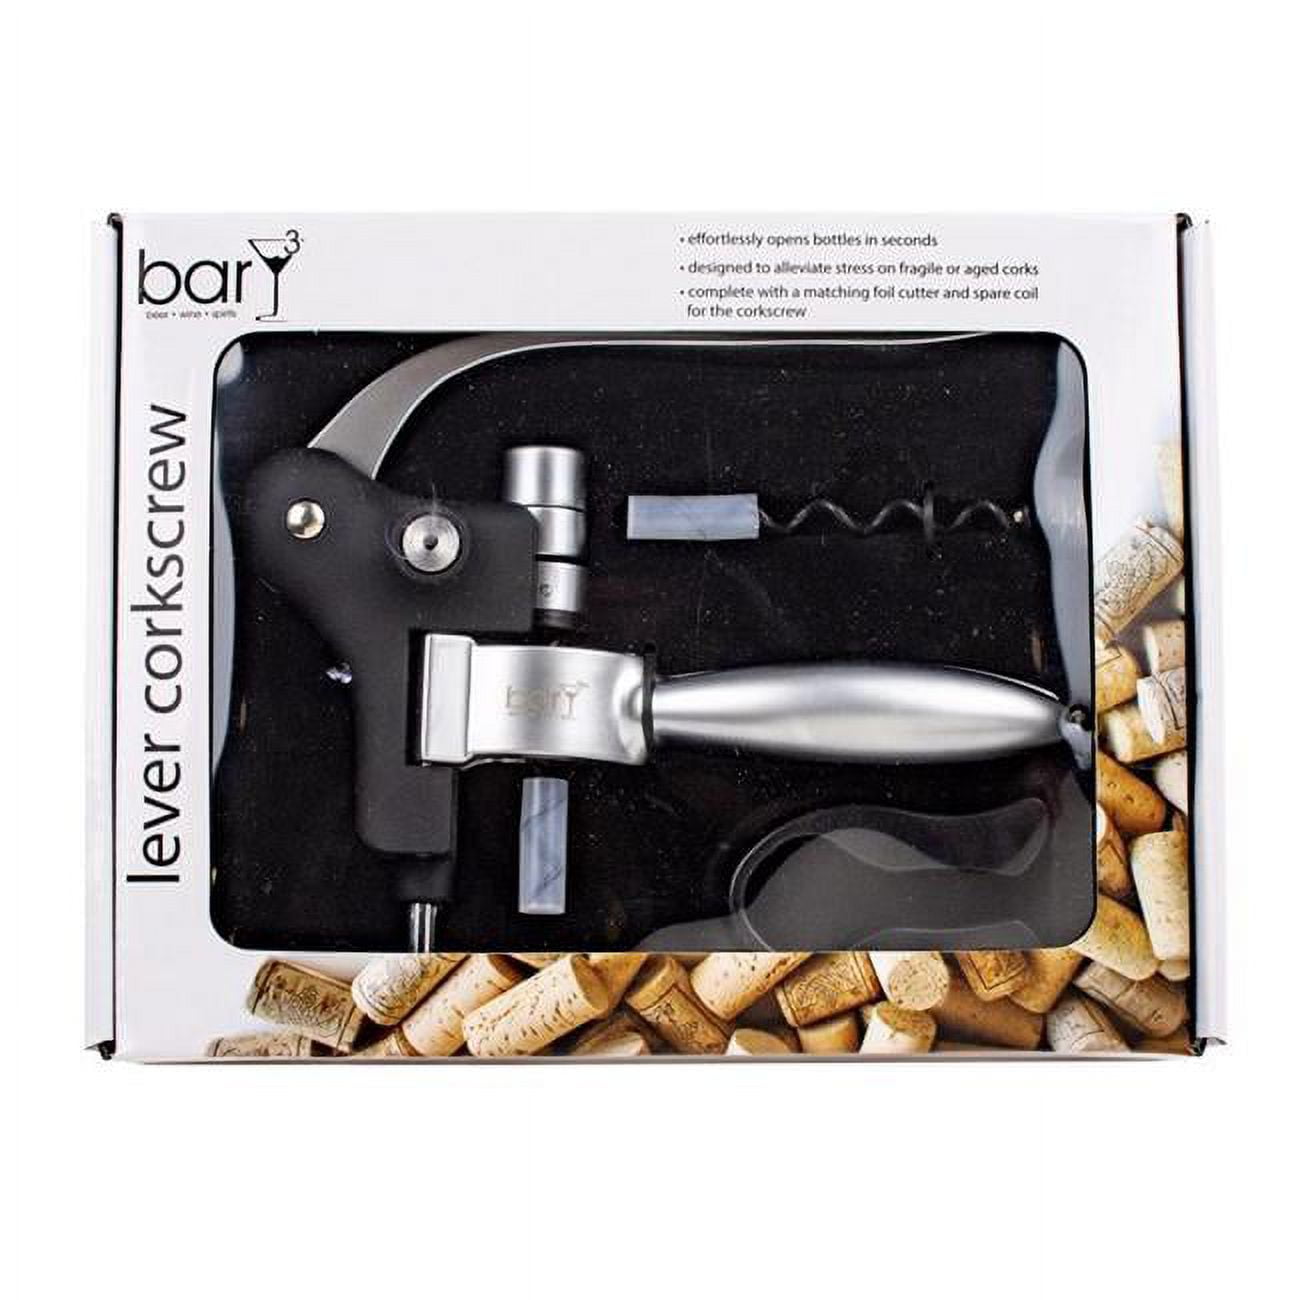 Picture of Bary3 6023177 Stainless Steel Lever Corkscrew Set - Black & Silver